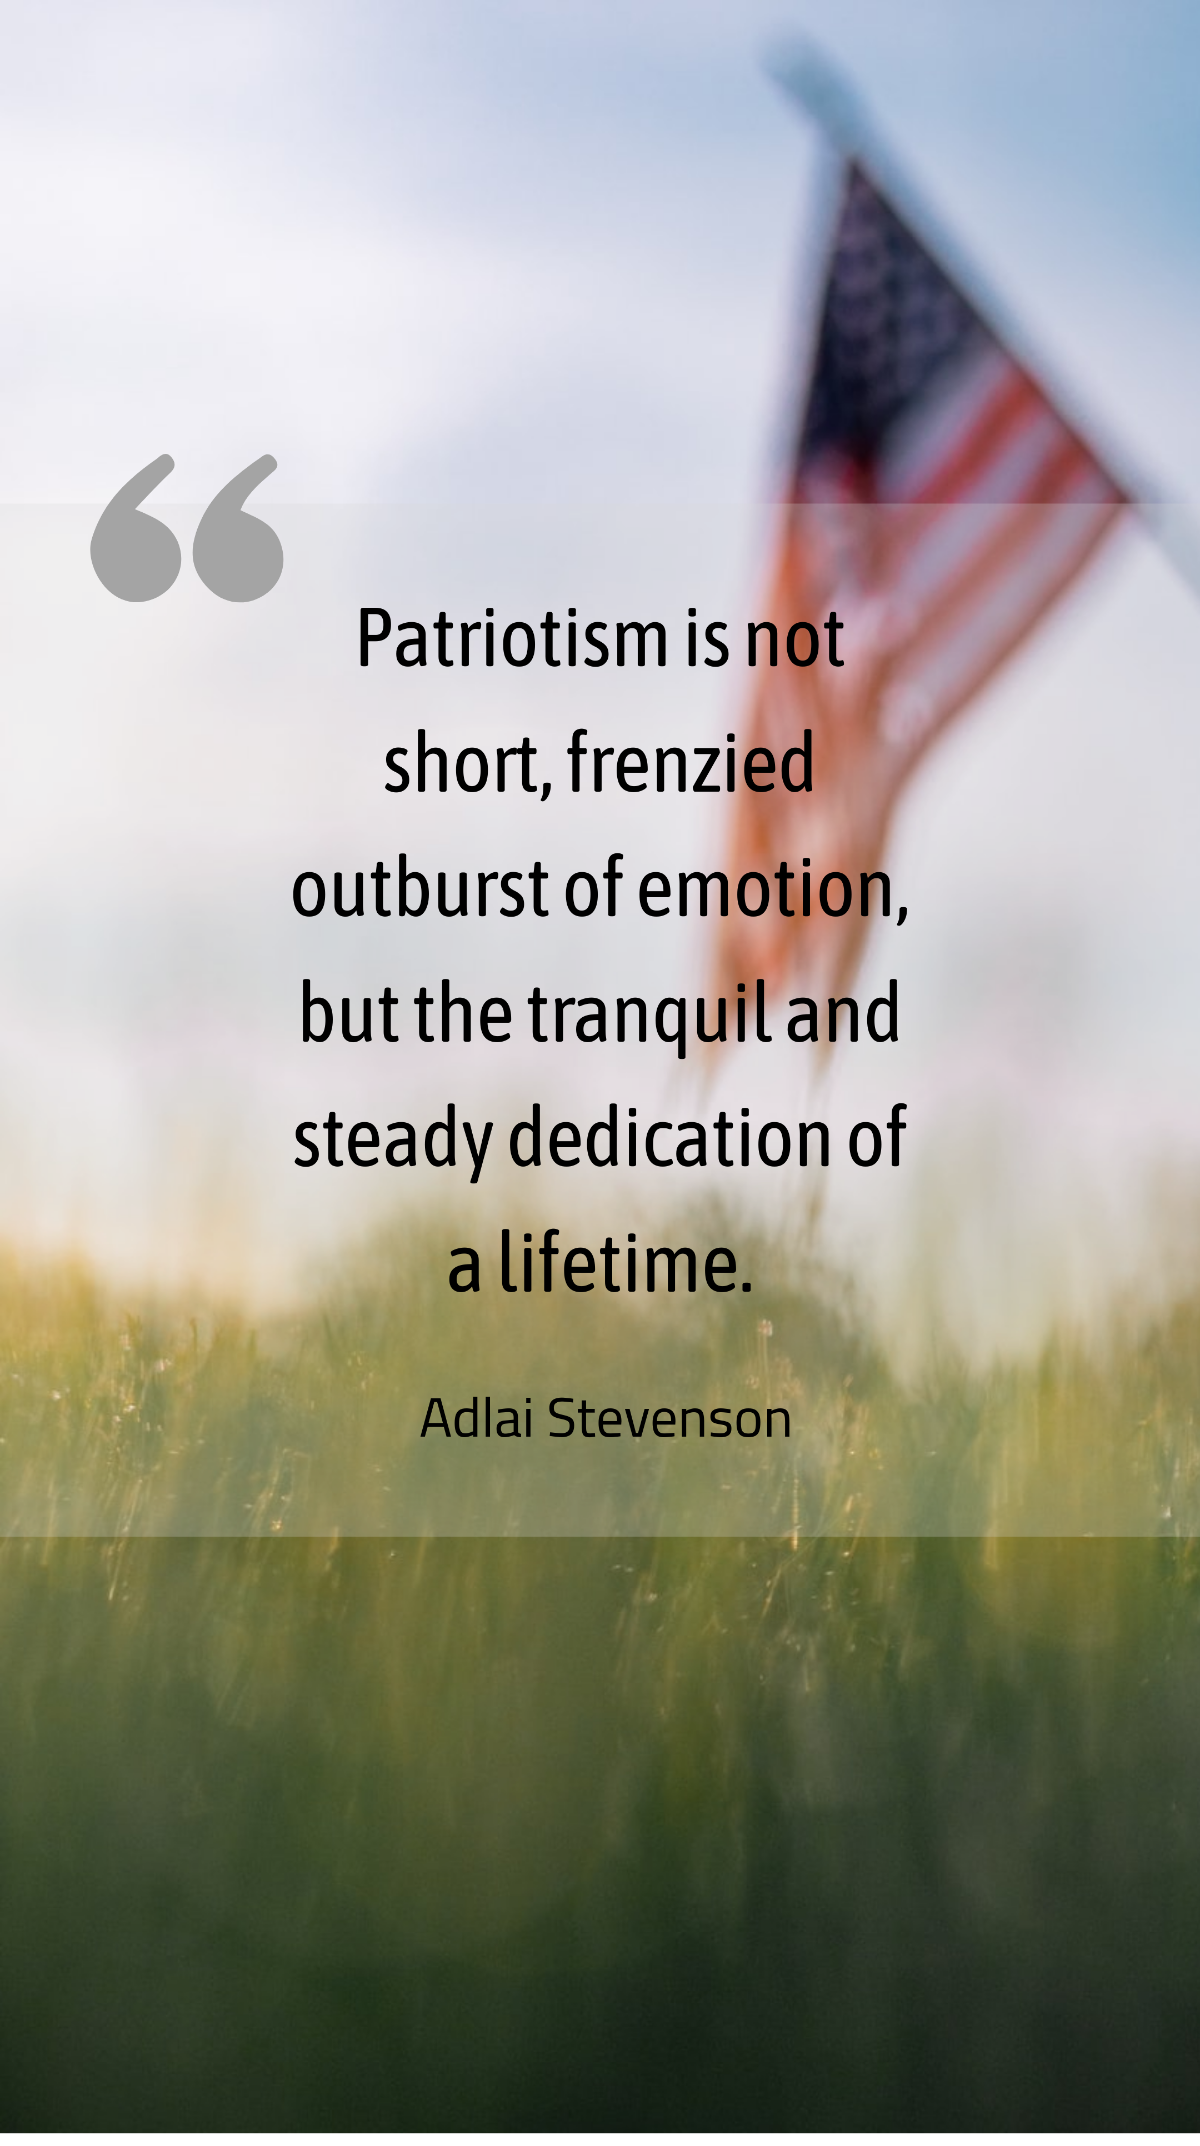 Adlai Stevenson - Patriotism is not short, frenzied outburst of emotion, but the tranquil and steady dedication of a lifetime. Template